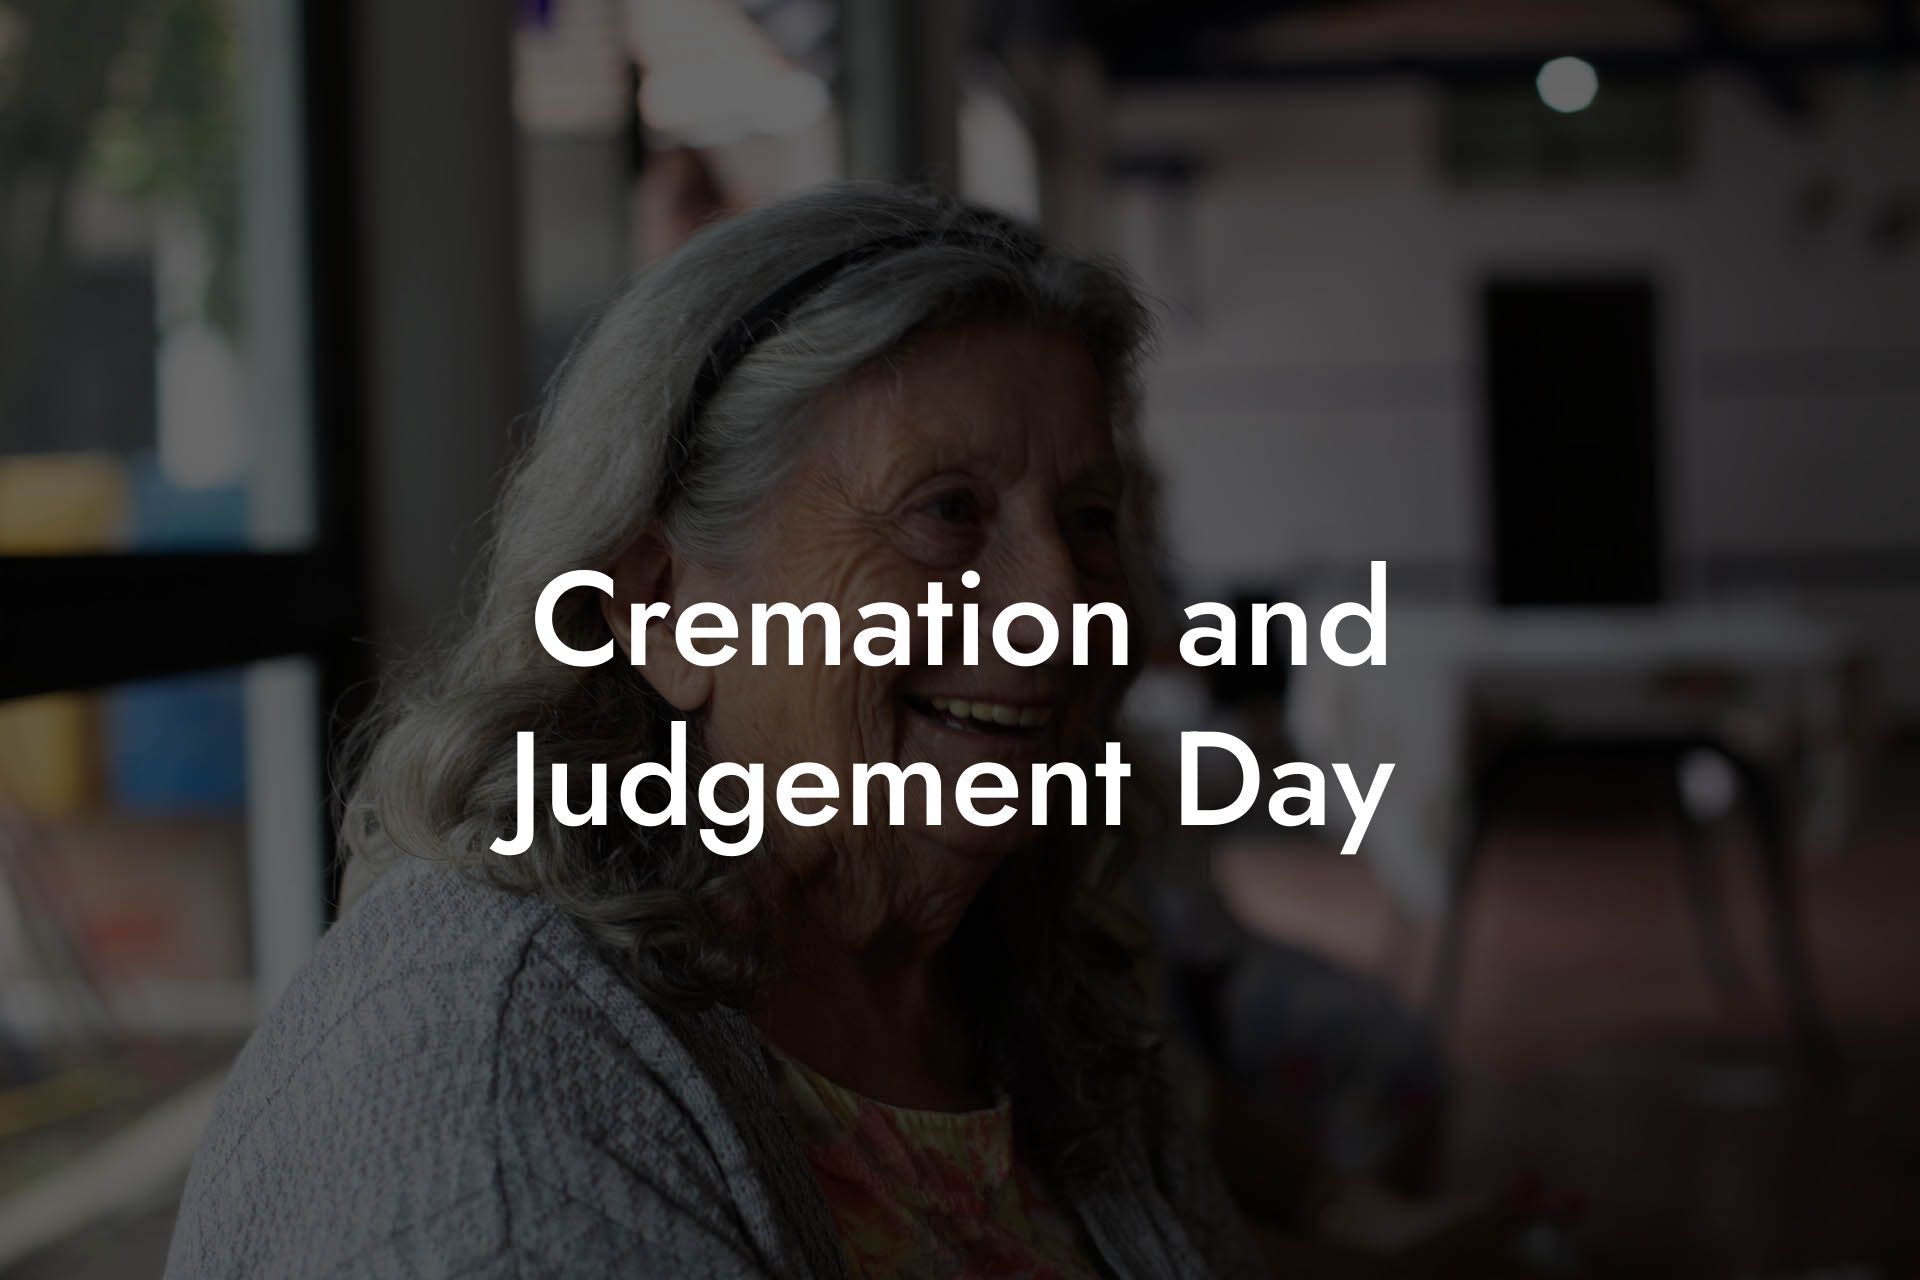 Cremation and Judgement Day